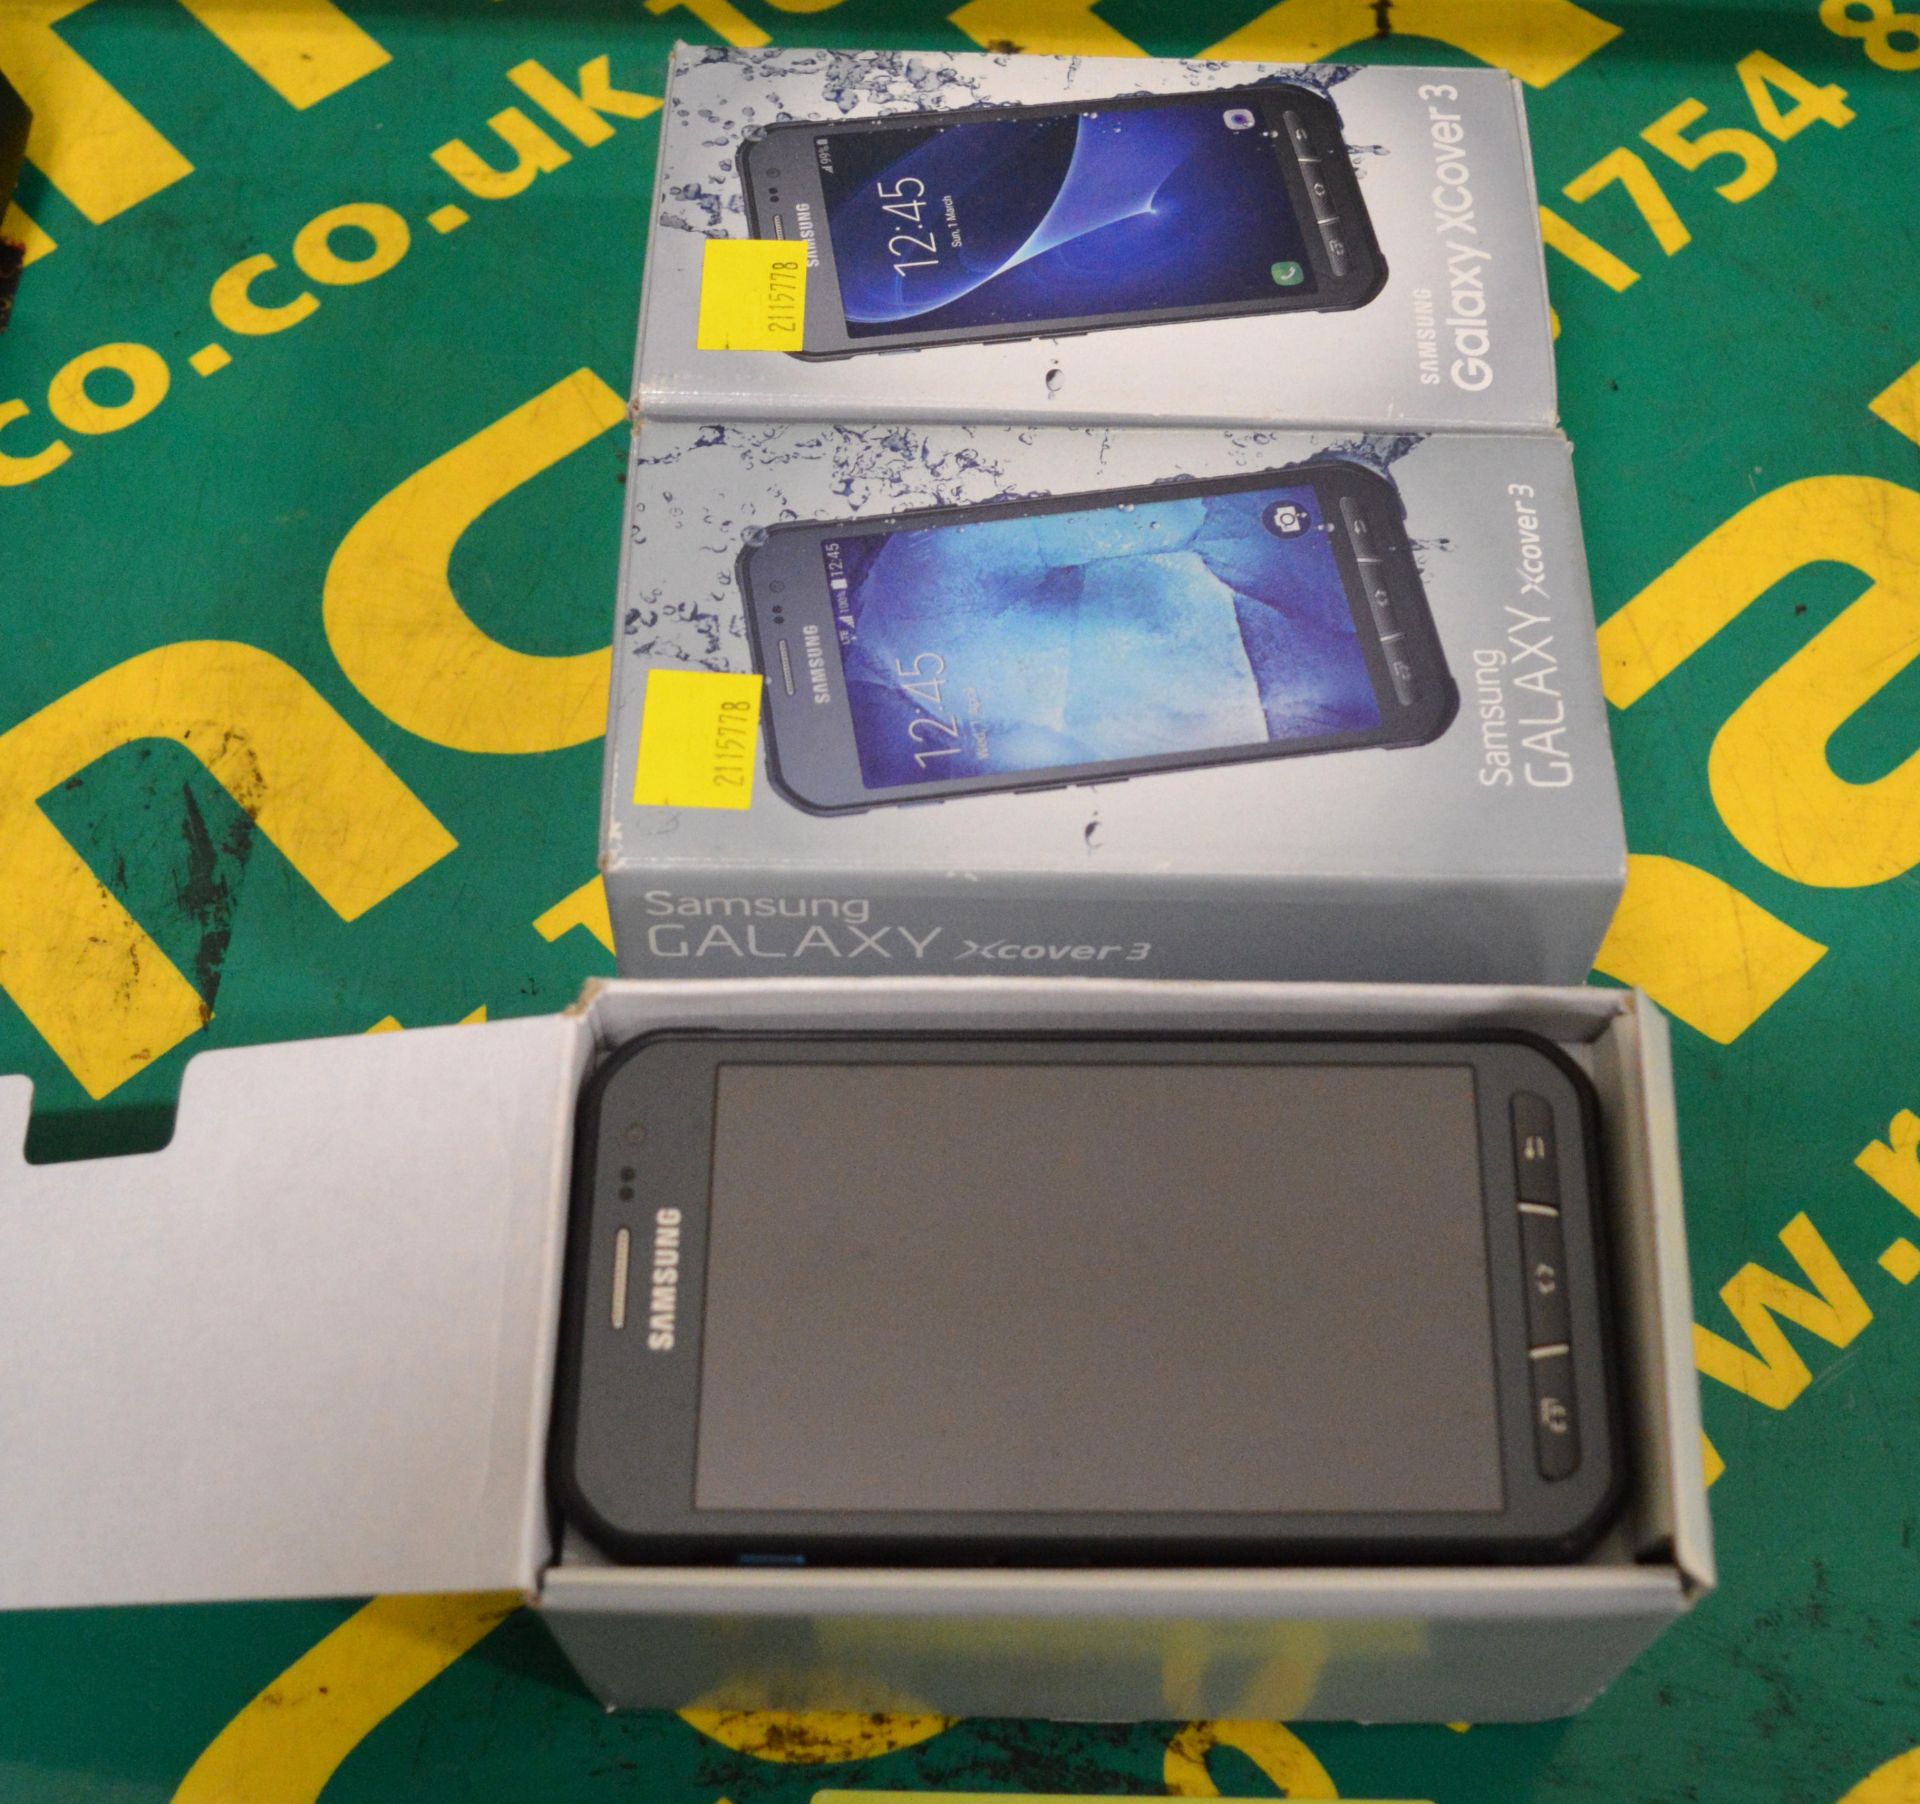 3x Samsung xcover 3 Mobile Phone.